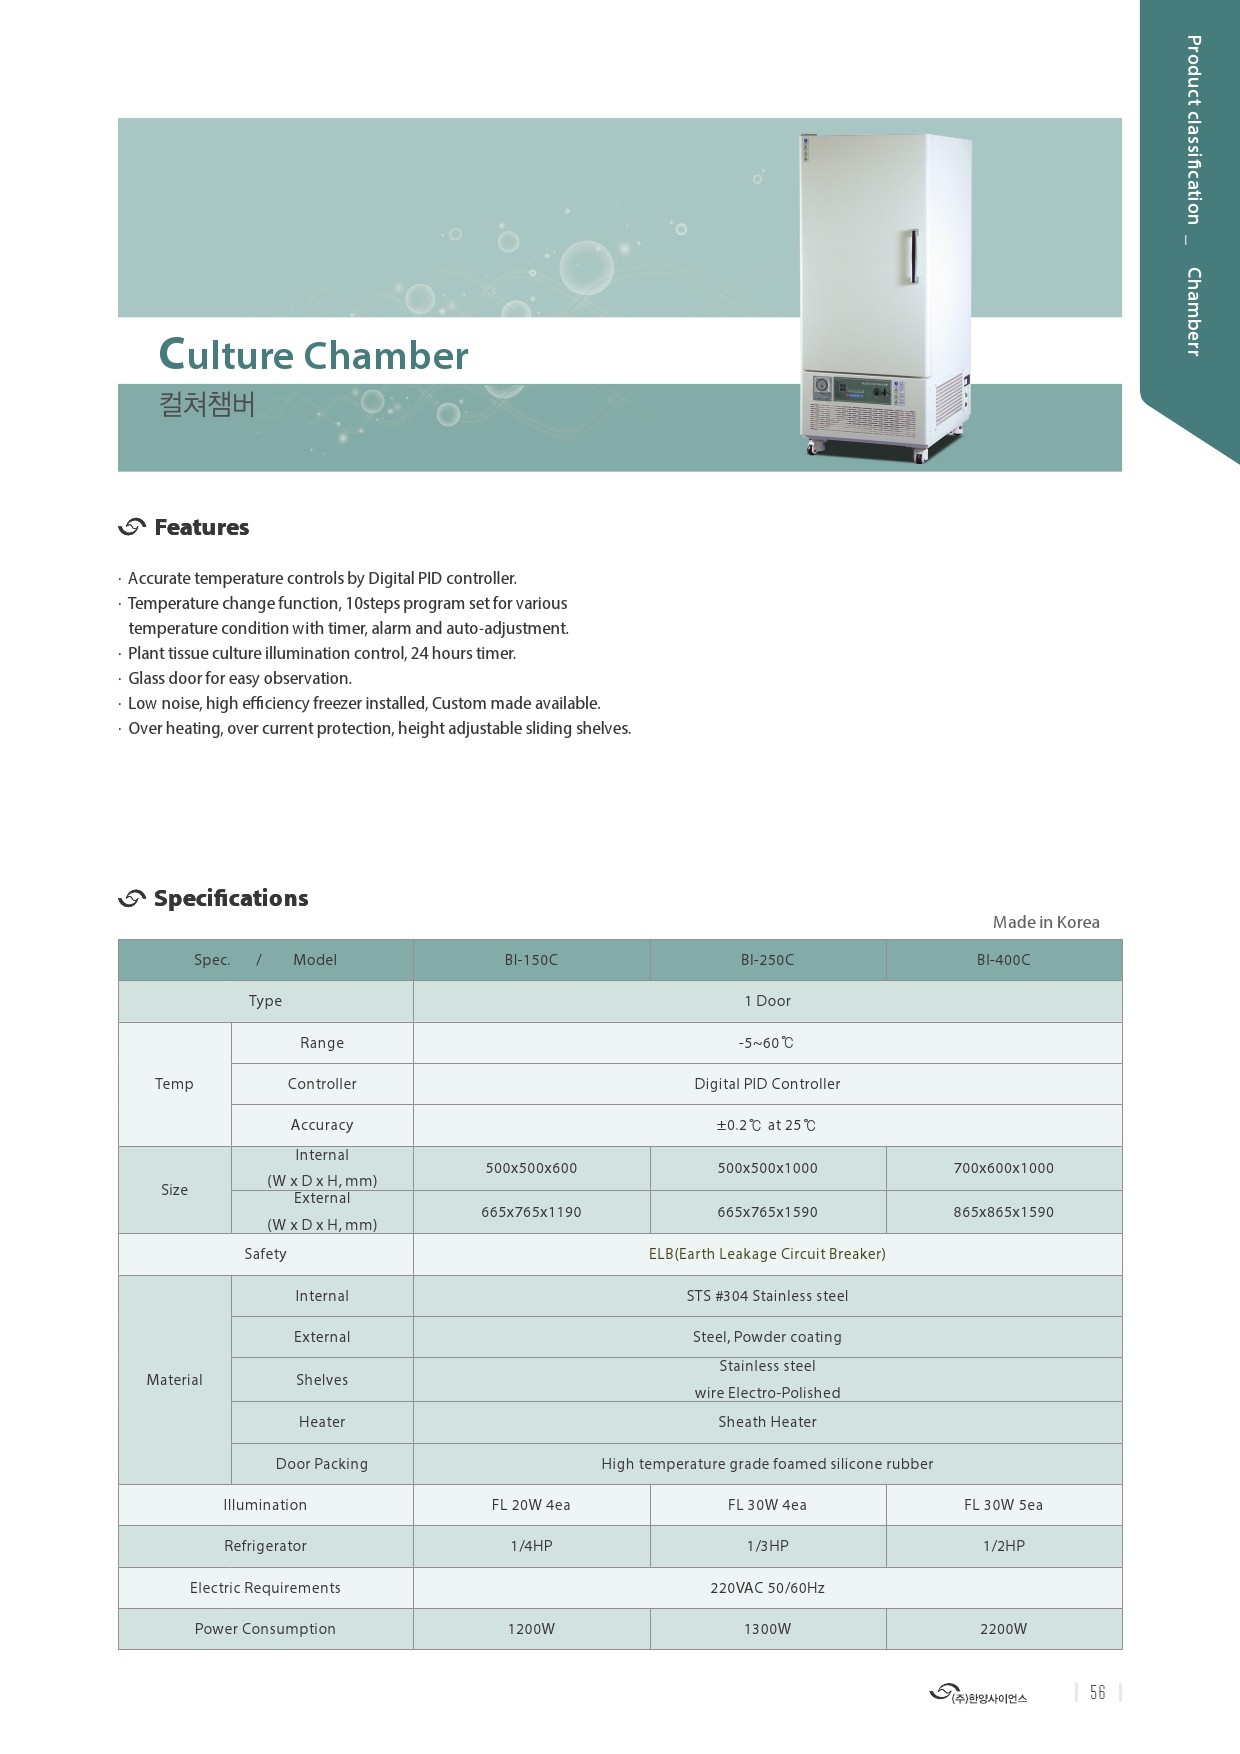 HYSC_Introduction_Culture Chamber-1.jpg